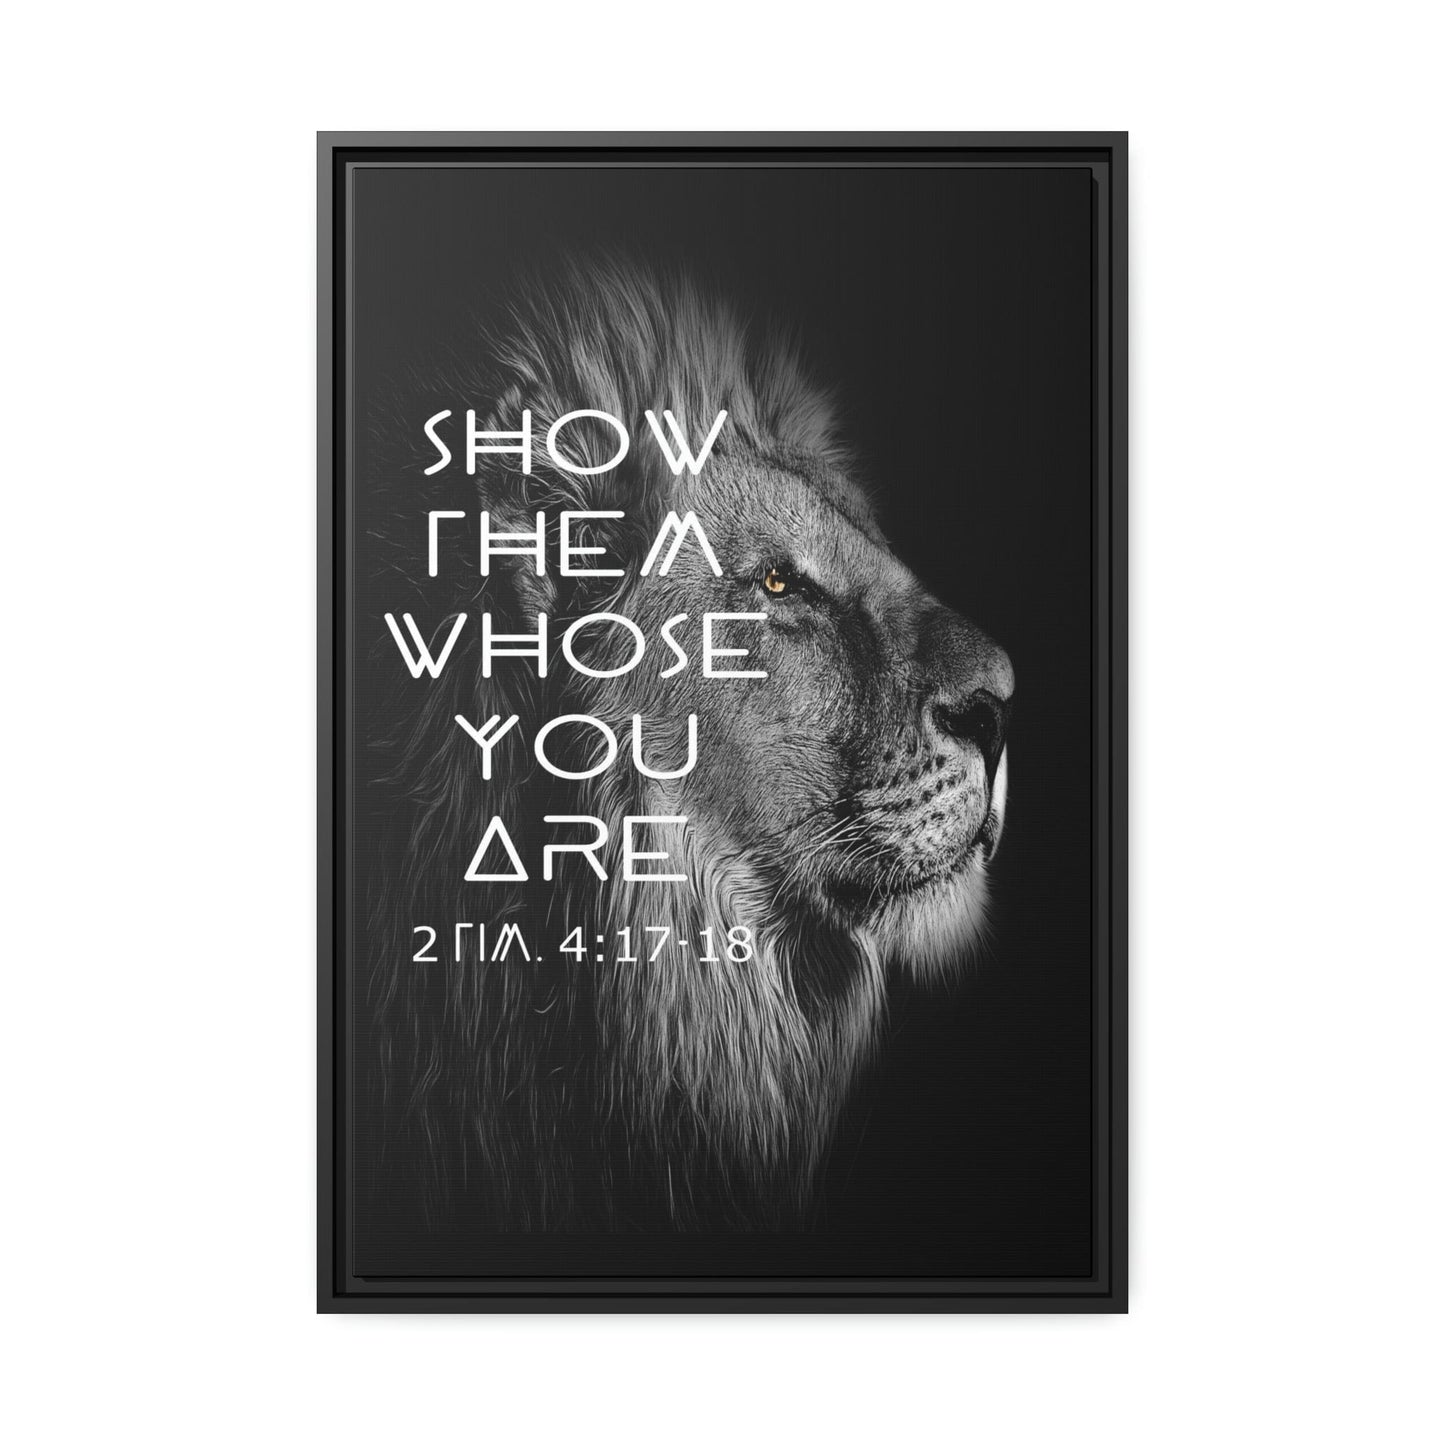 Printify Canvas 20″ x 30″ (Vertical) / Black / 1.25" Show Them Whose You Are - 2 Tim 4:17-18 Christian Canvas Wall Art